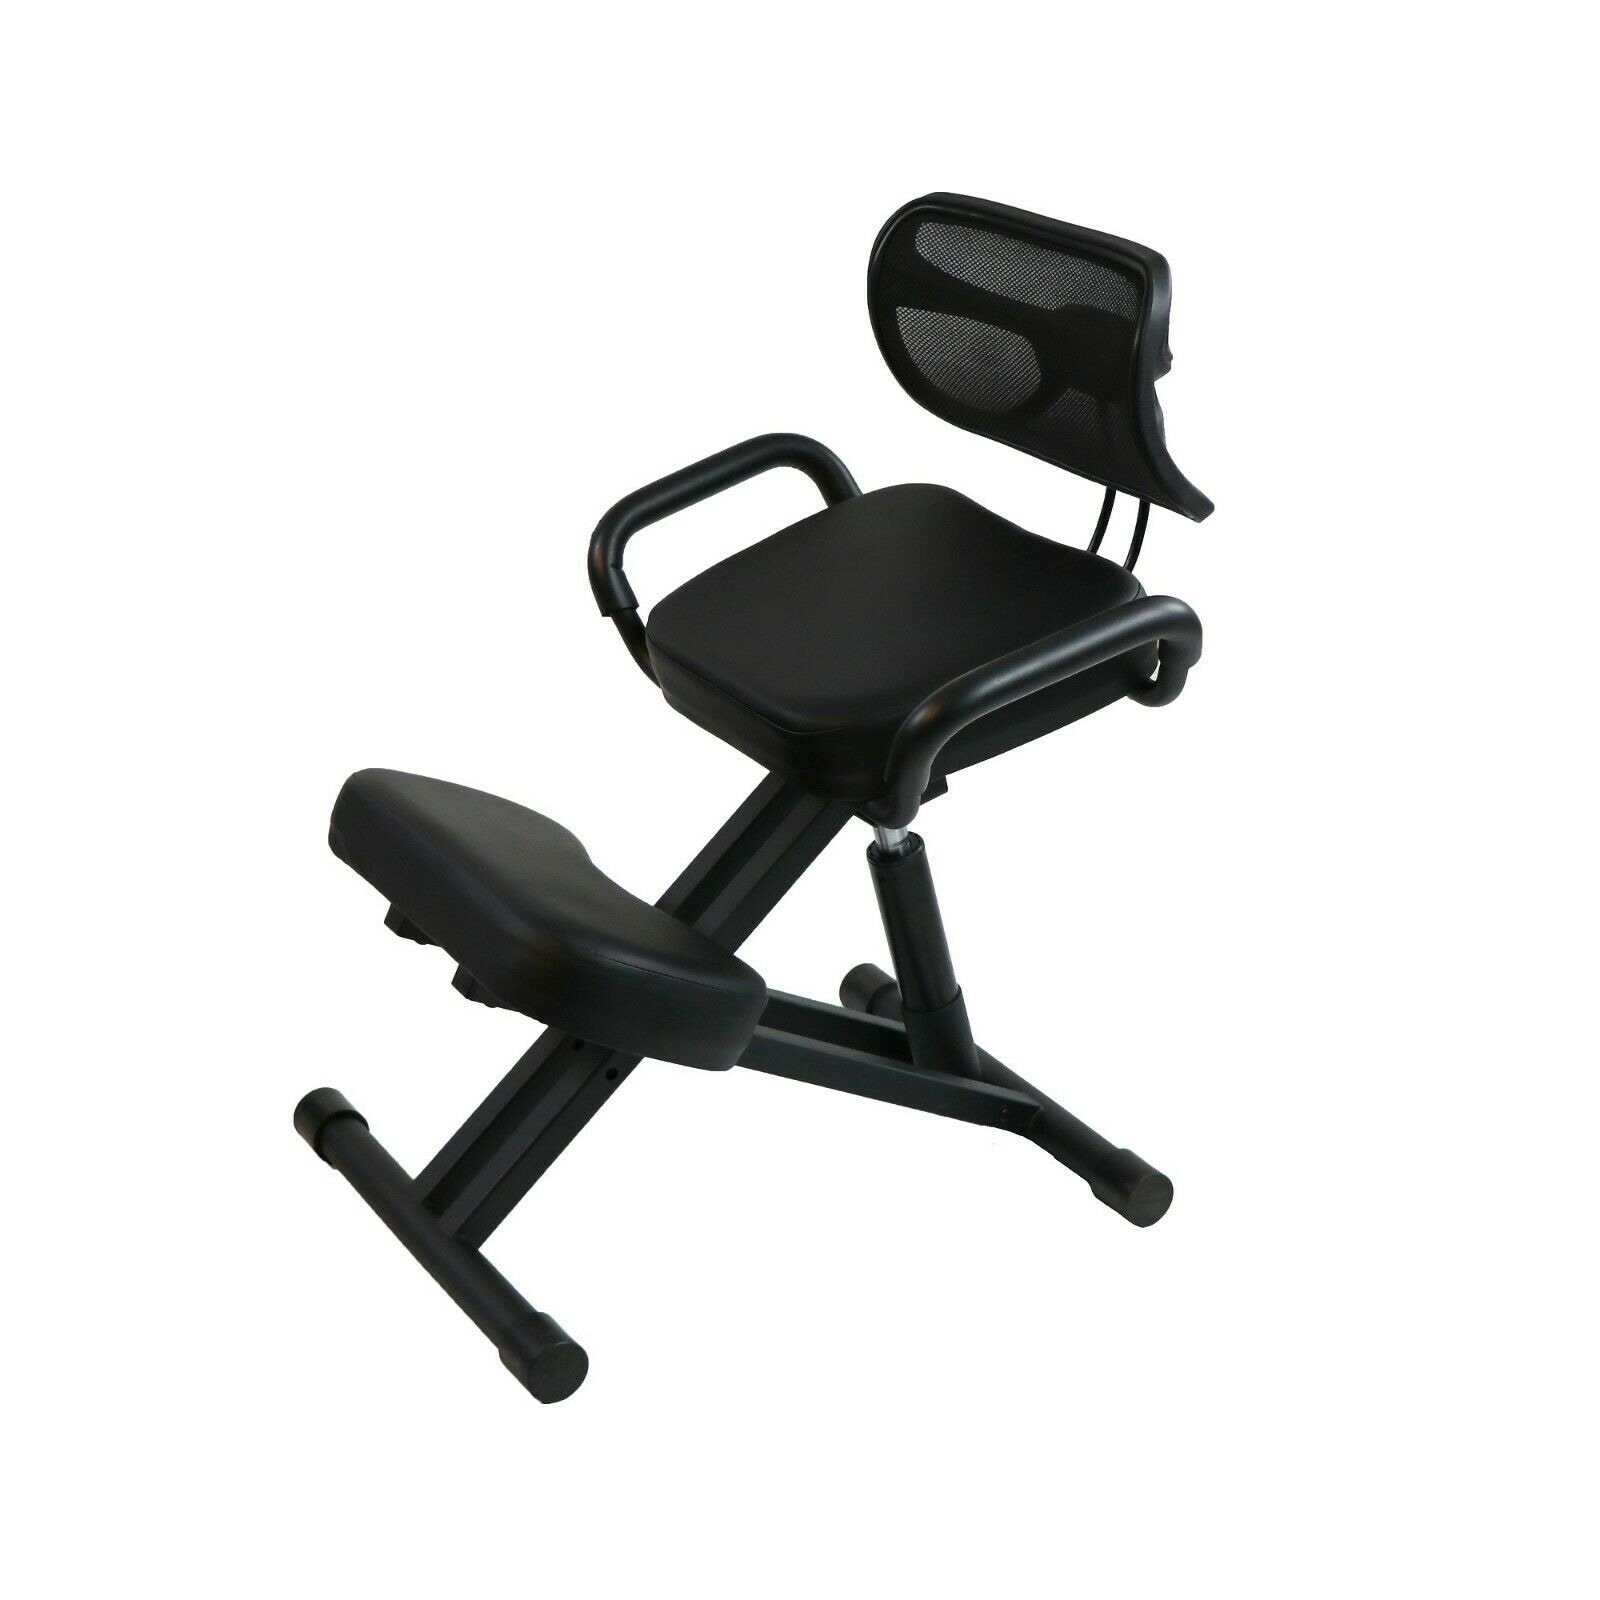 Master Massage Multifunctional Ergonomic Kneeling Posture Chair with Back Support, Adjustable Angle Stool for Home Office